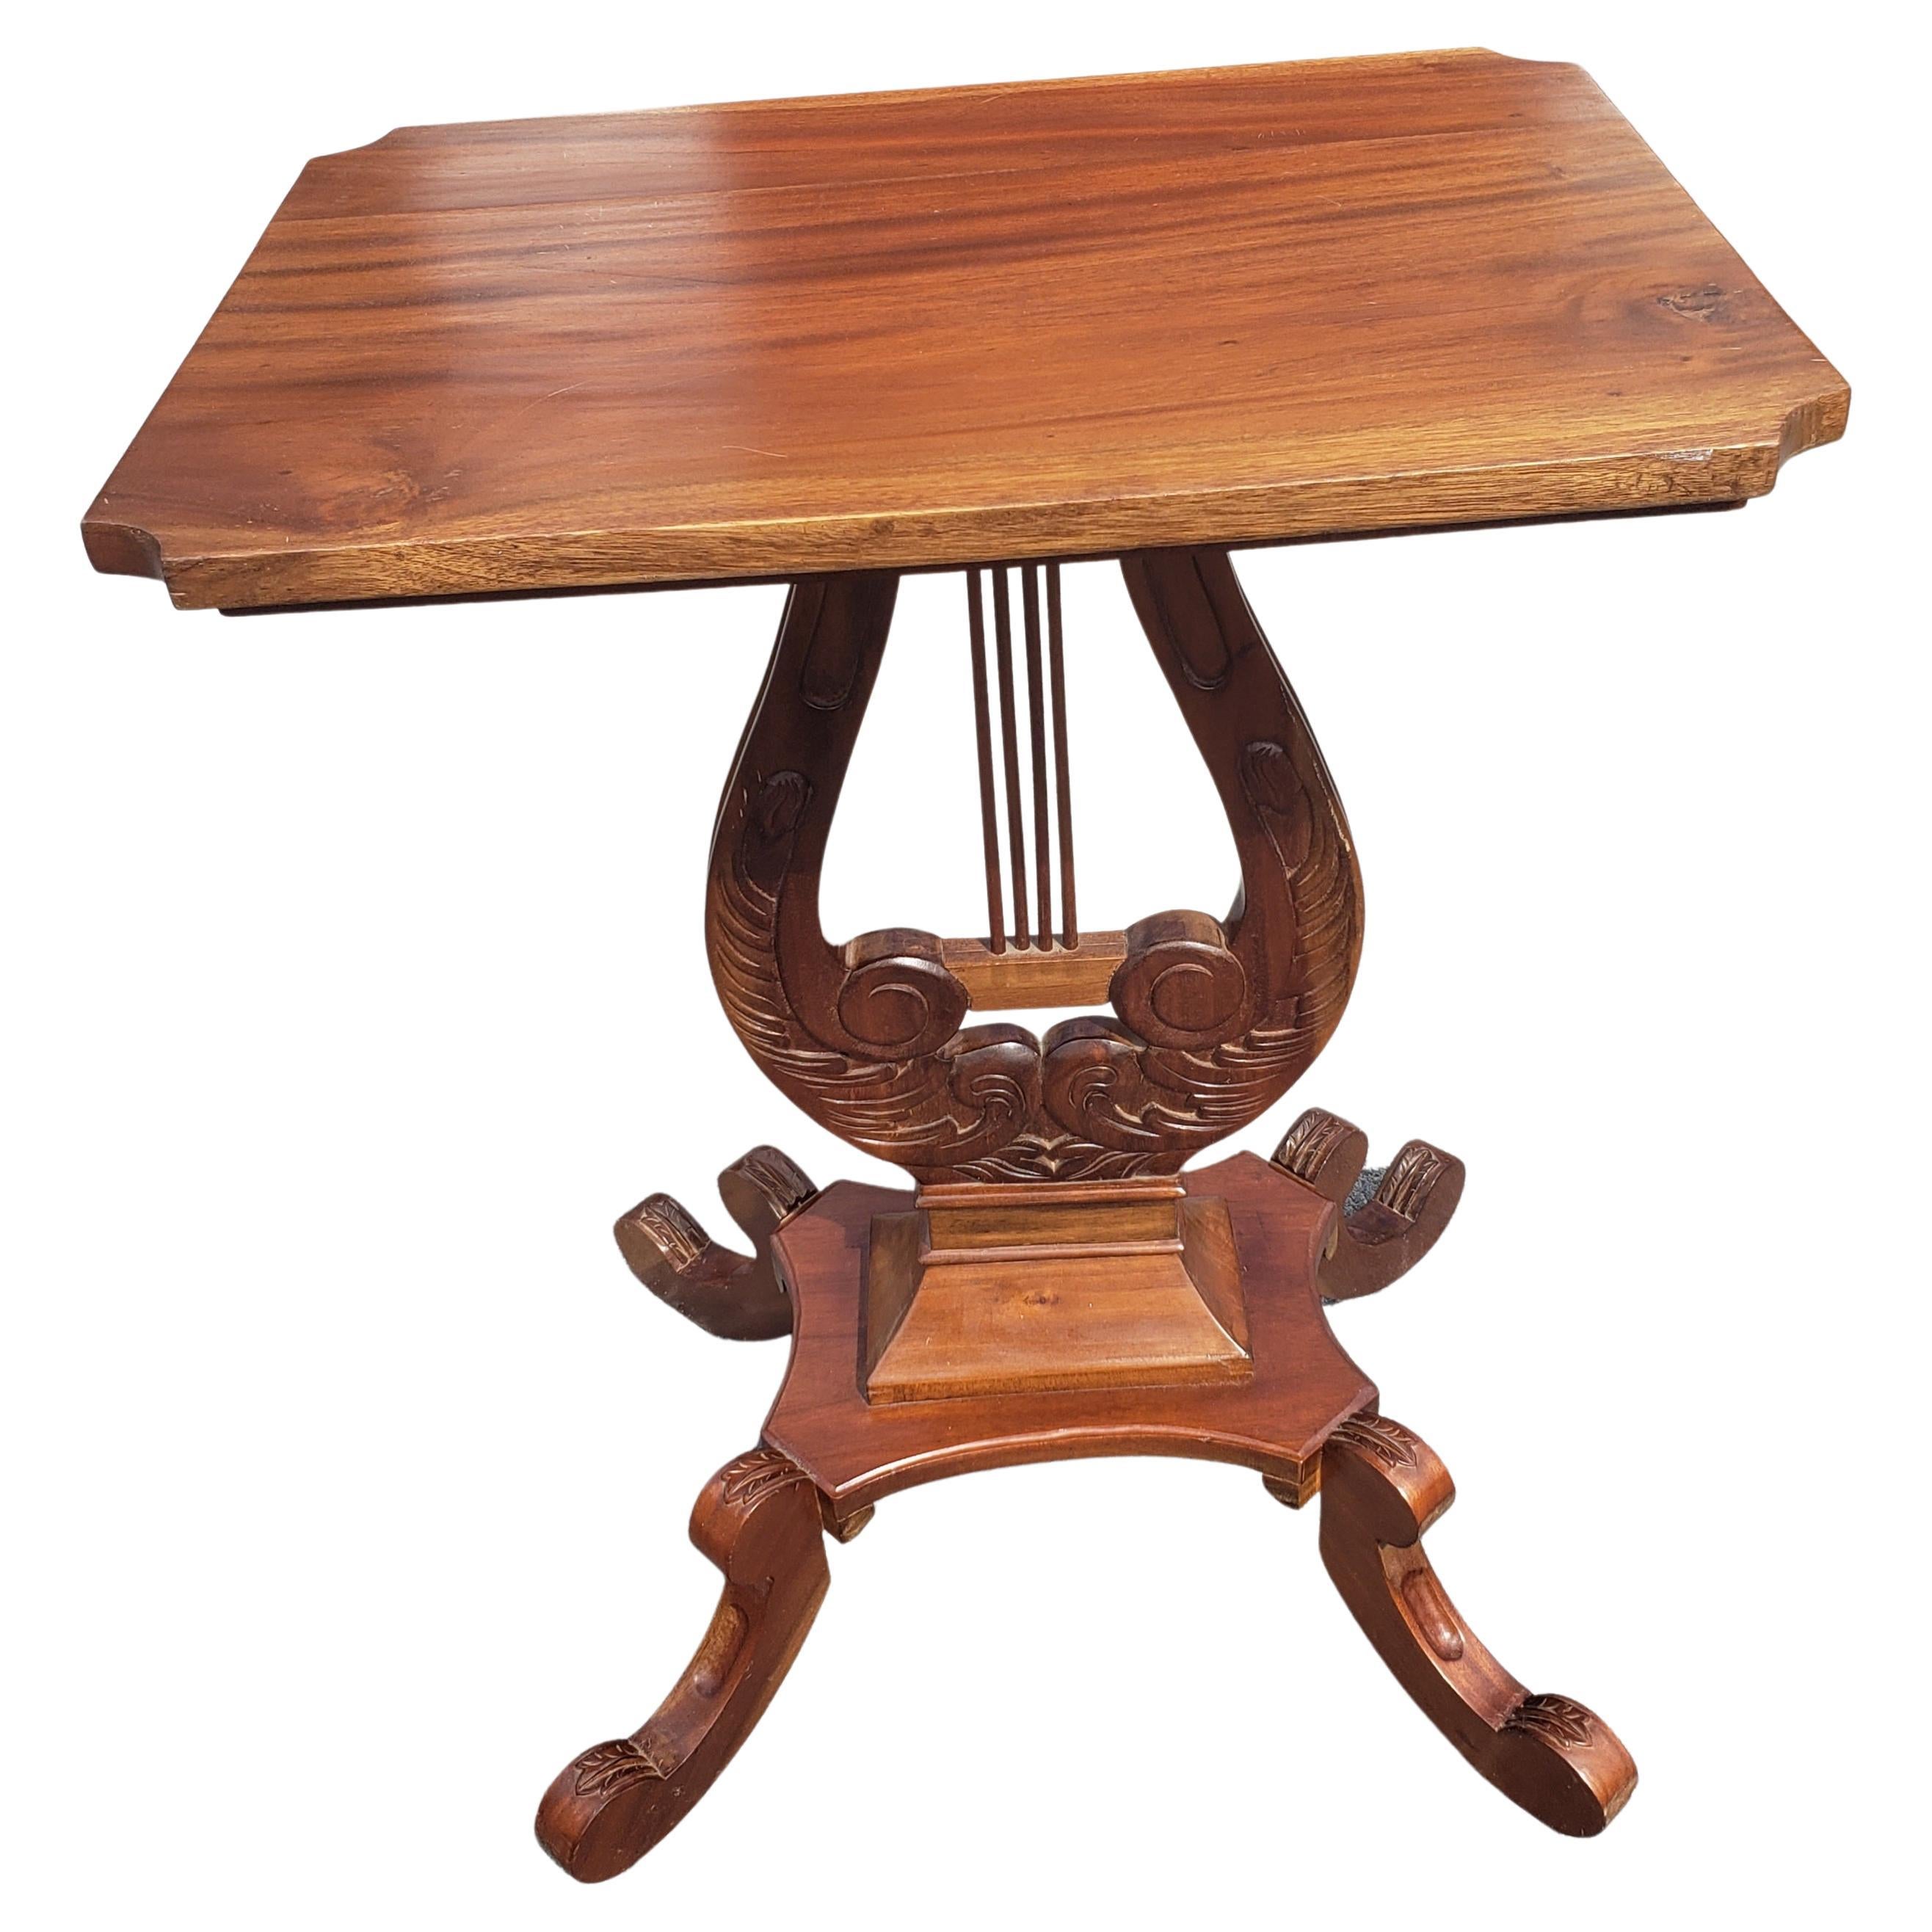 American Empire Mahogany Rectangular Lyre Base Side Table, C 1940s For Sale